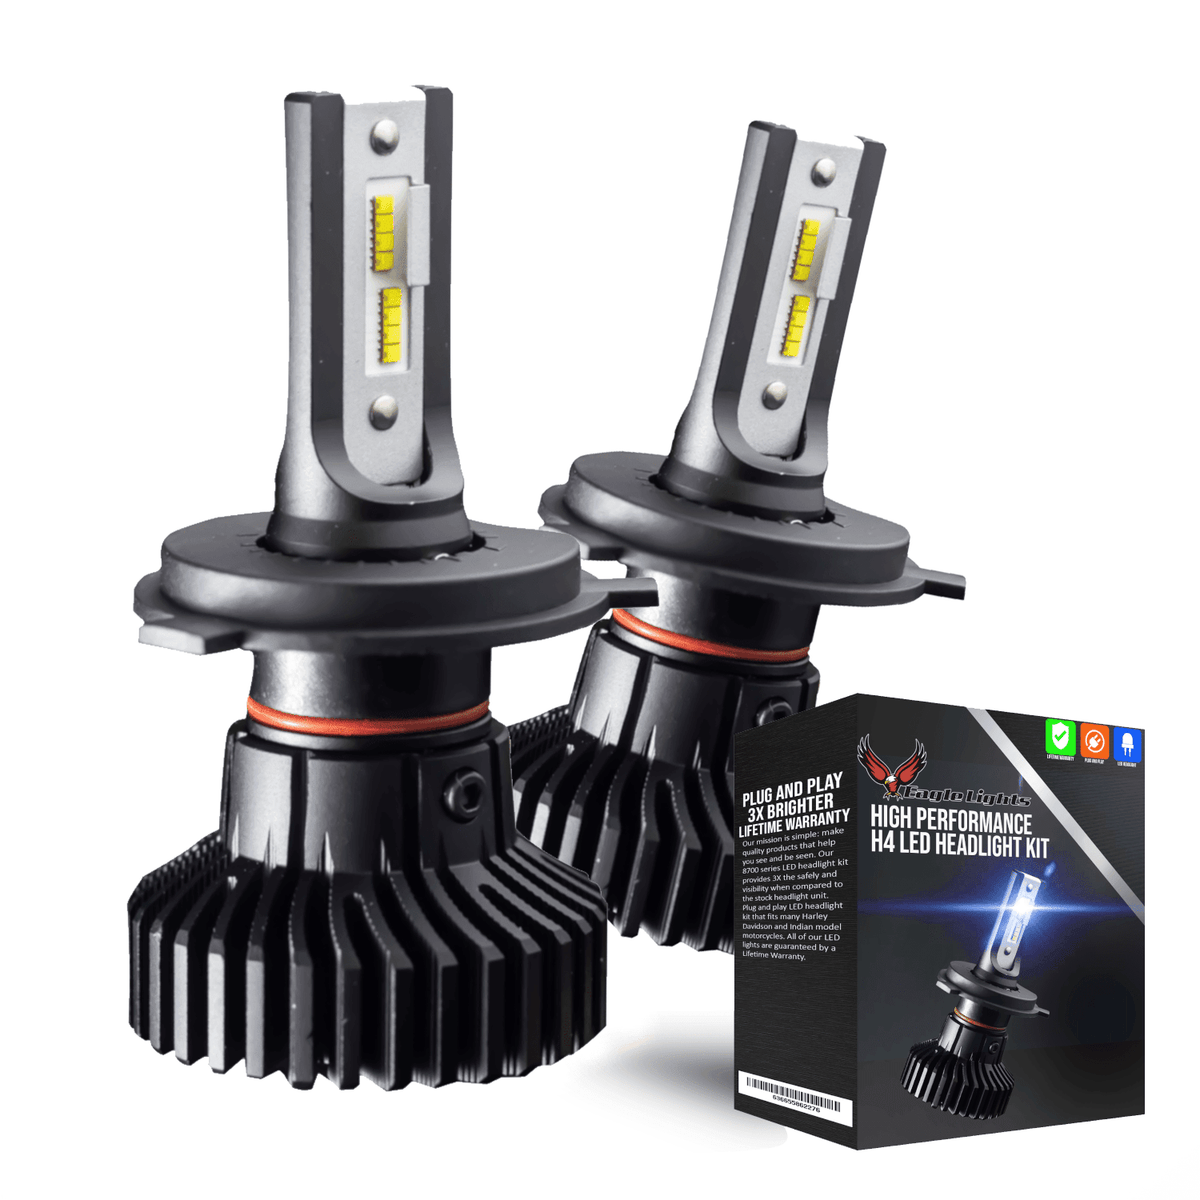 Eagle Lights Infinity Beam H7 LED Headlight Bulb for KTM Motorcycles - 2 Pack (High and Low Beam)